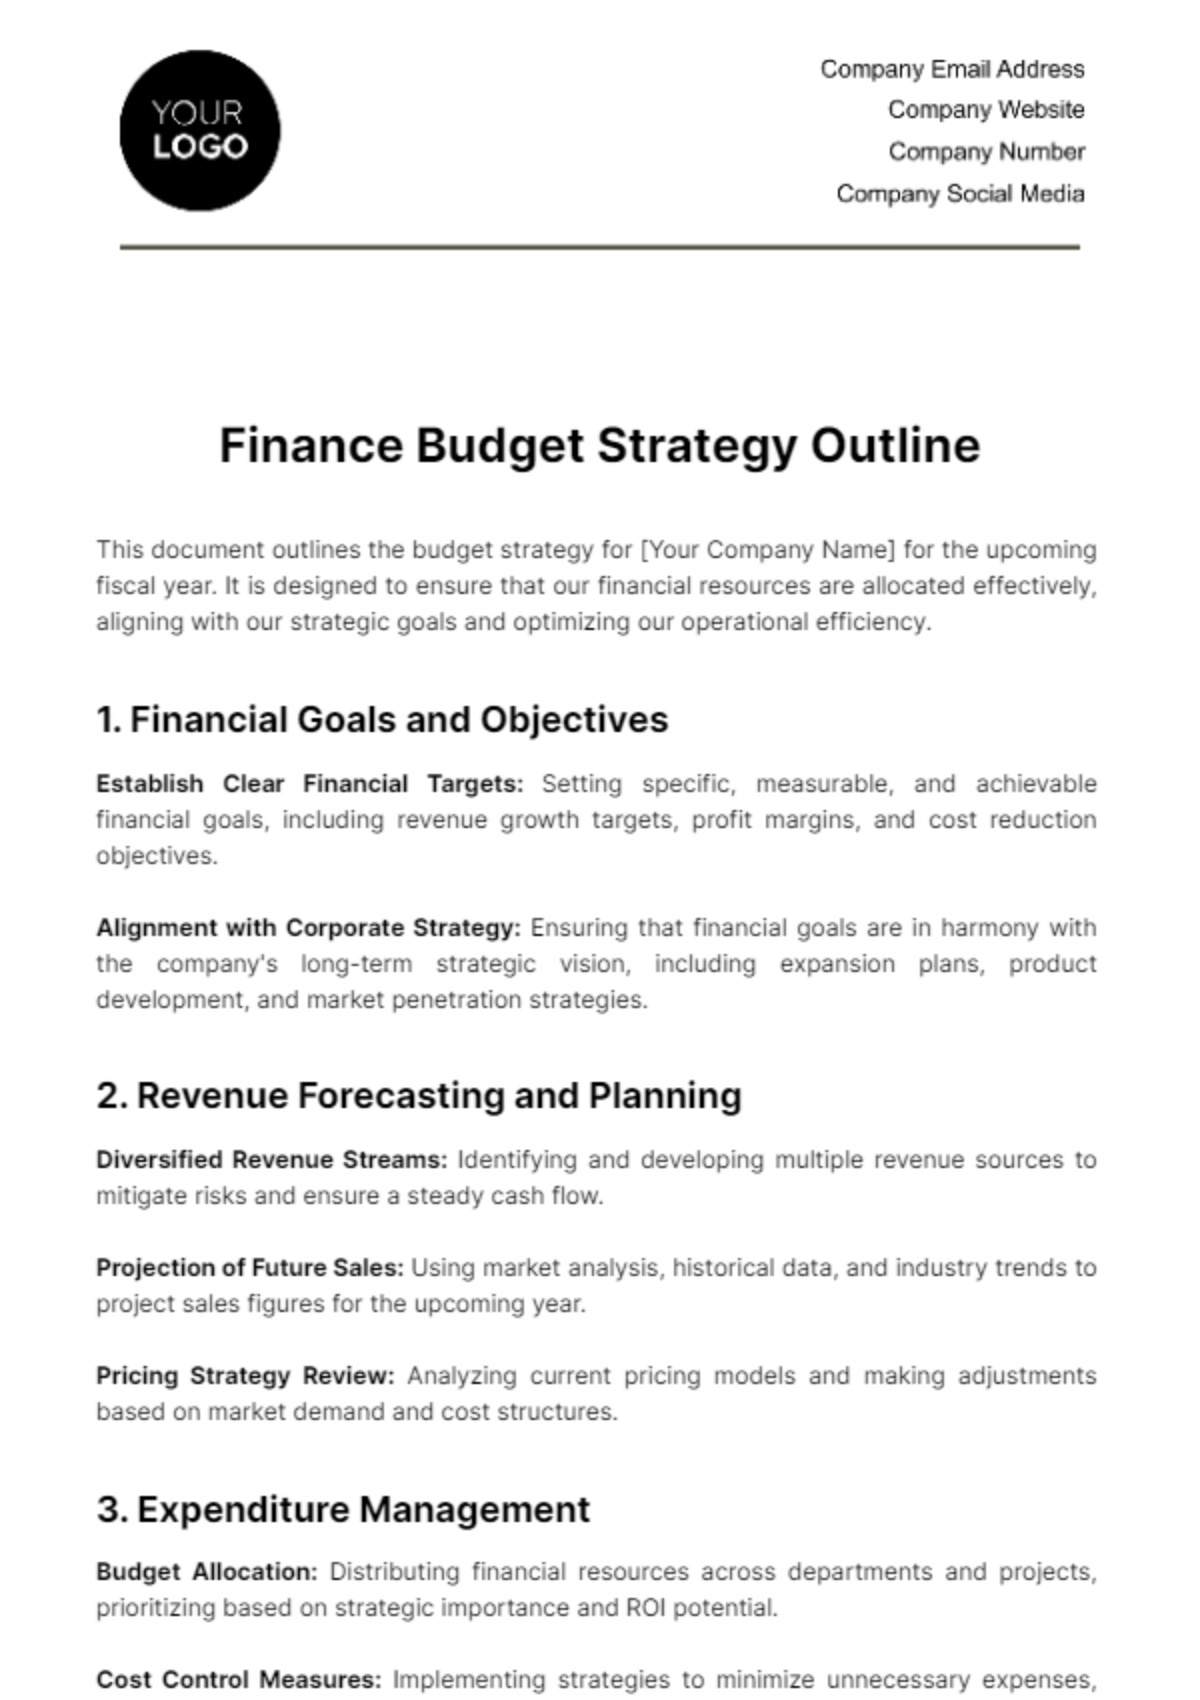 Free Finance Budget Strategy Outline Template